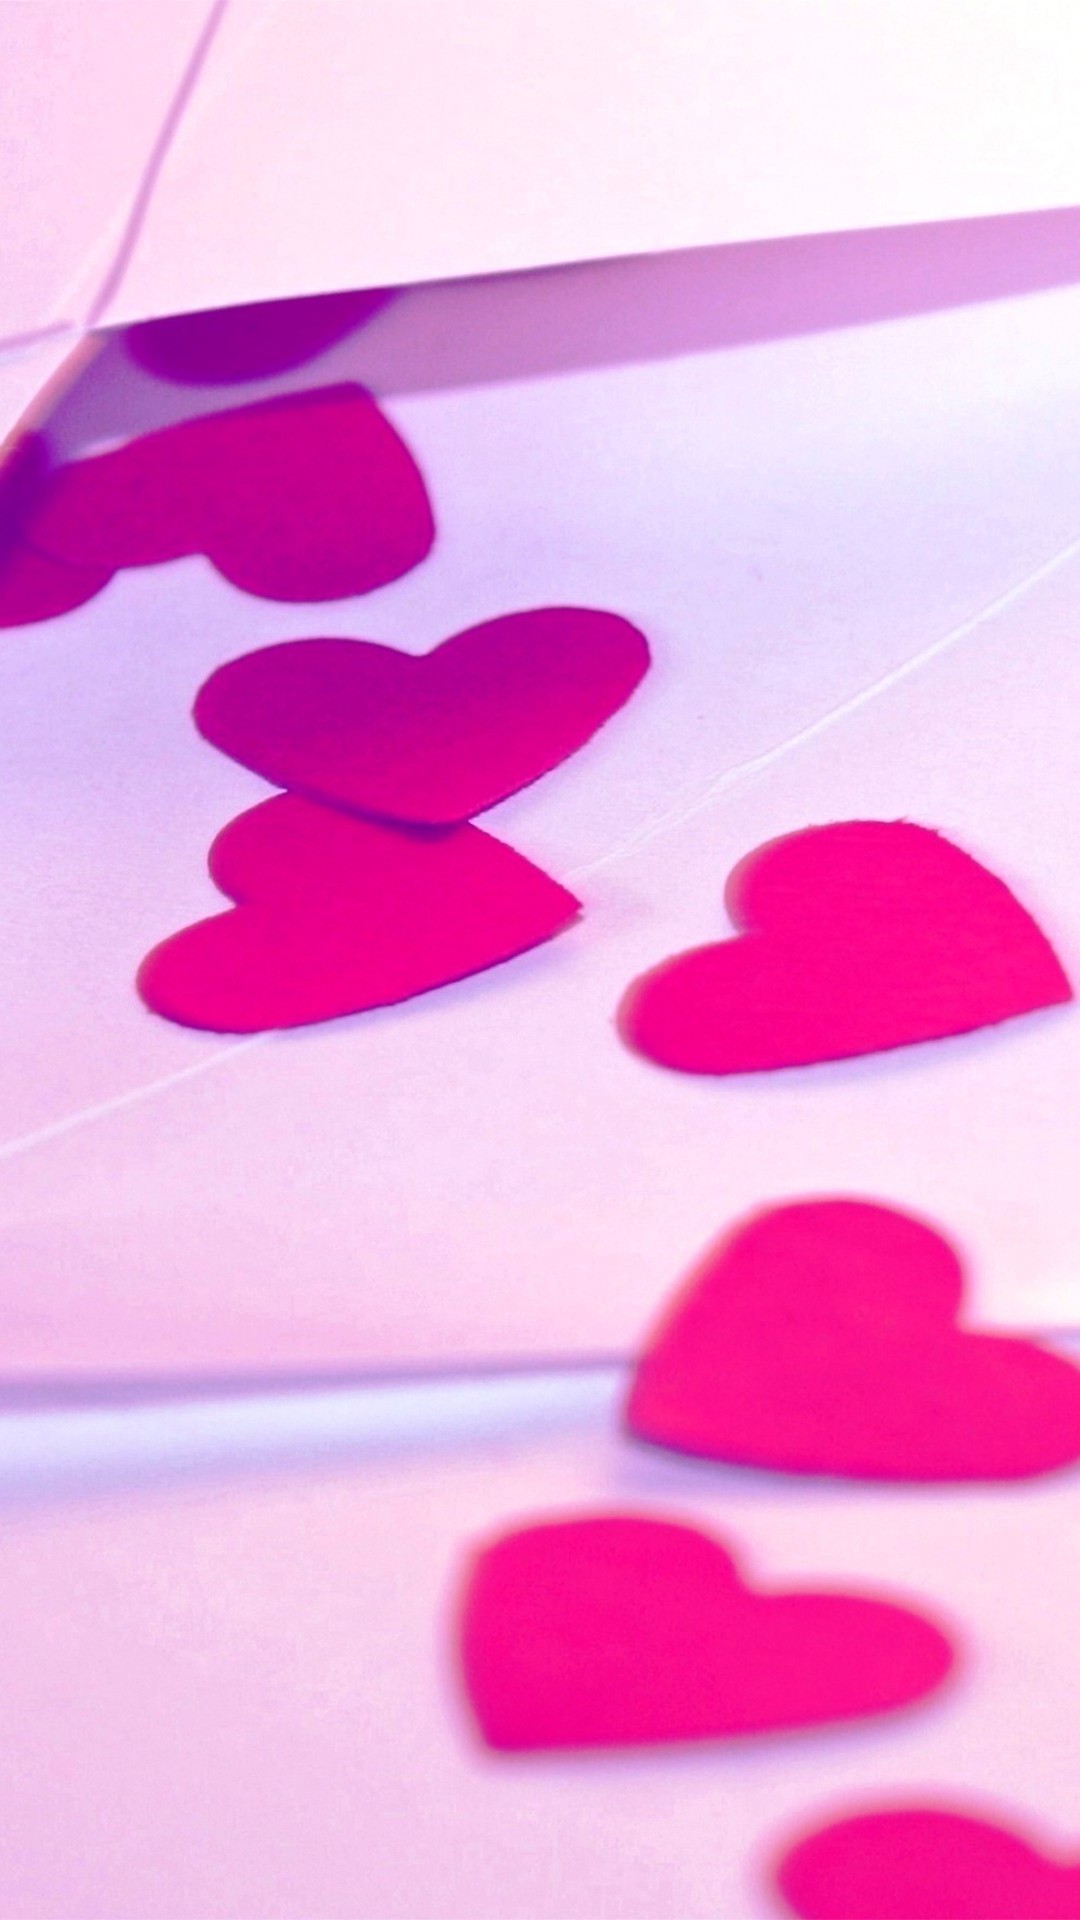 Wallpaper Pink Love For Mobile | 2021 Cute Wallpapers